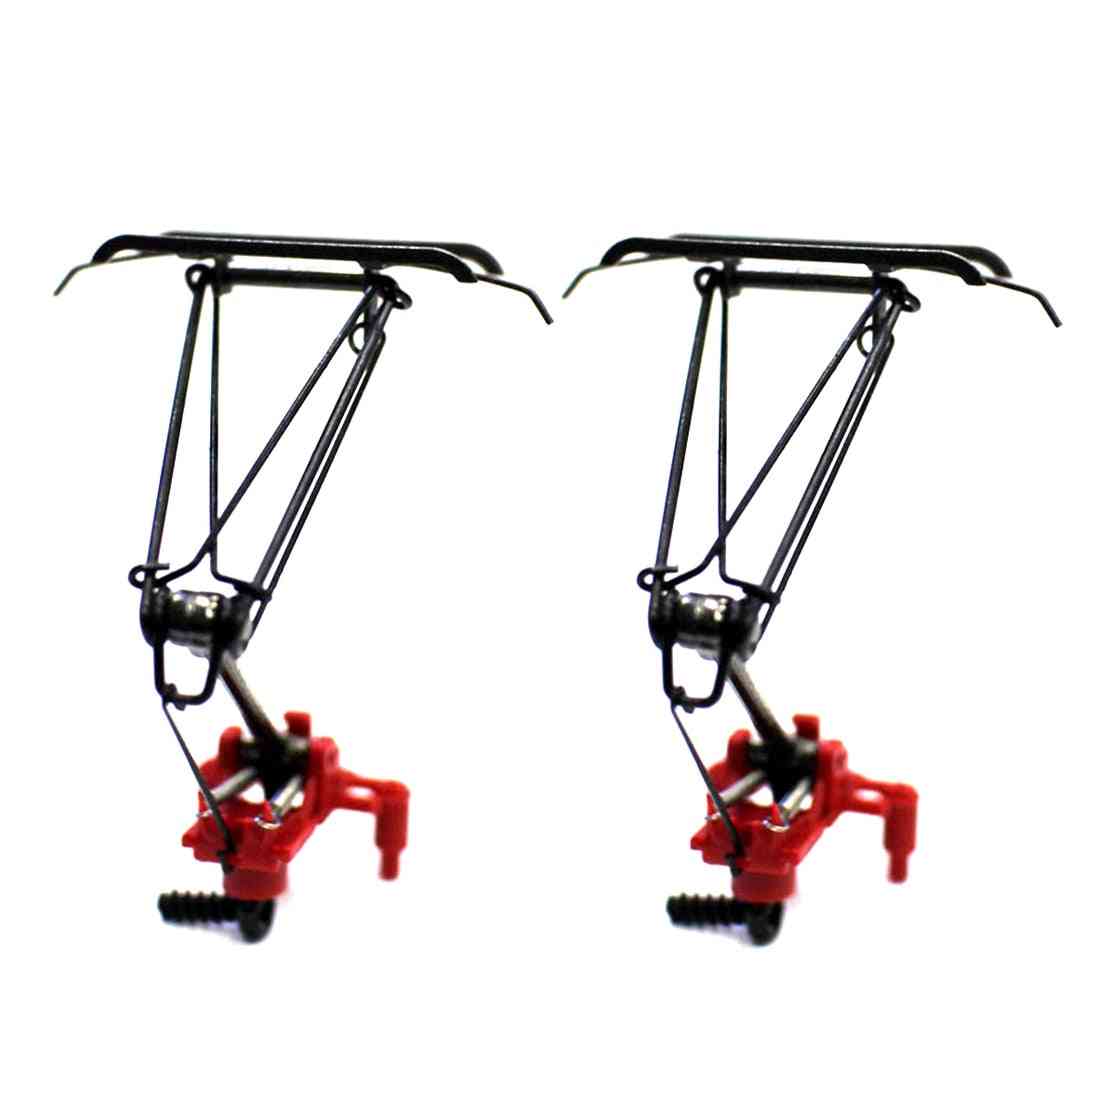 Traction Pantograph Train Arm Bow For Sand Table Model